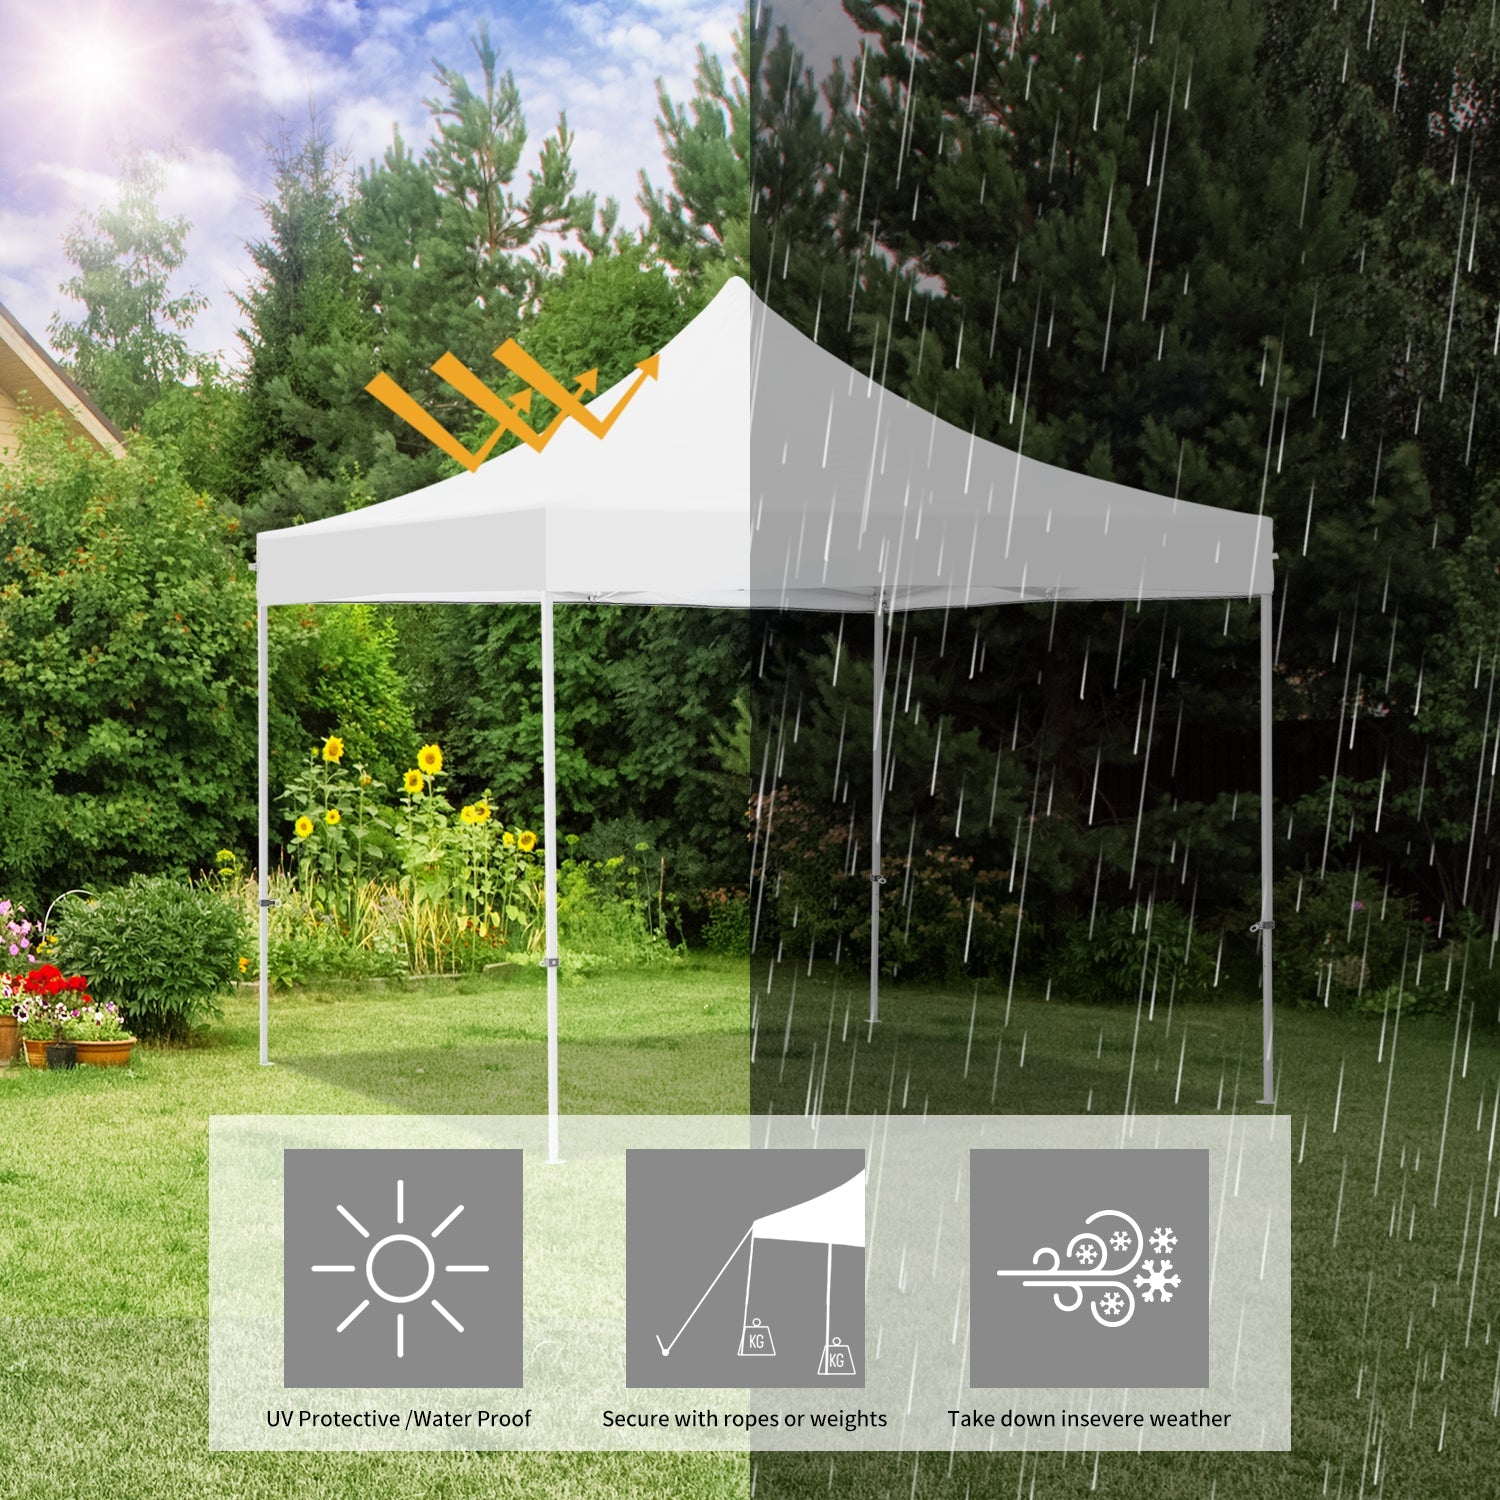 Outdoor Basic 10 x 10 ft Outdoor Gazebo Easy Pop-up Instant Patio Canopy Garden Tent for Patio Gazebo BBQ Beach Tailgating Party, Rain and sun protection(White)